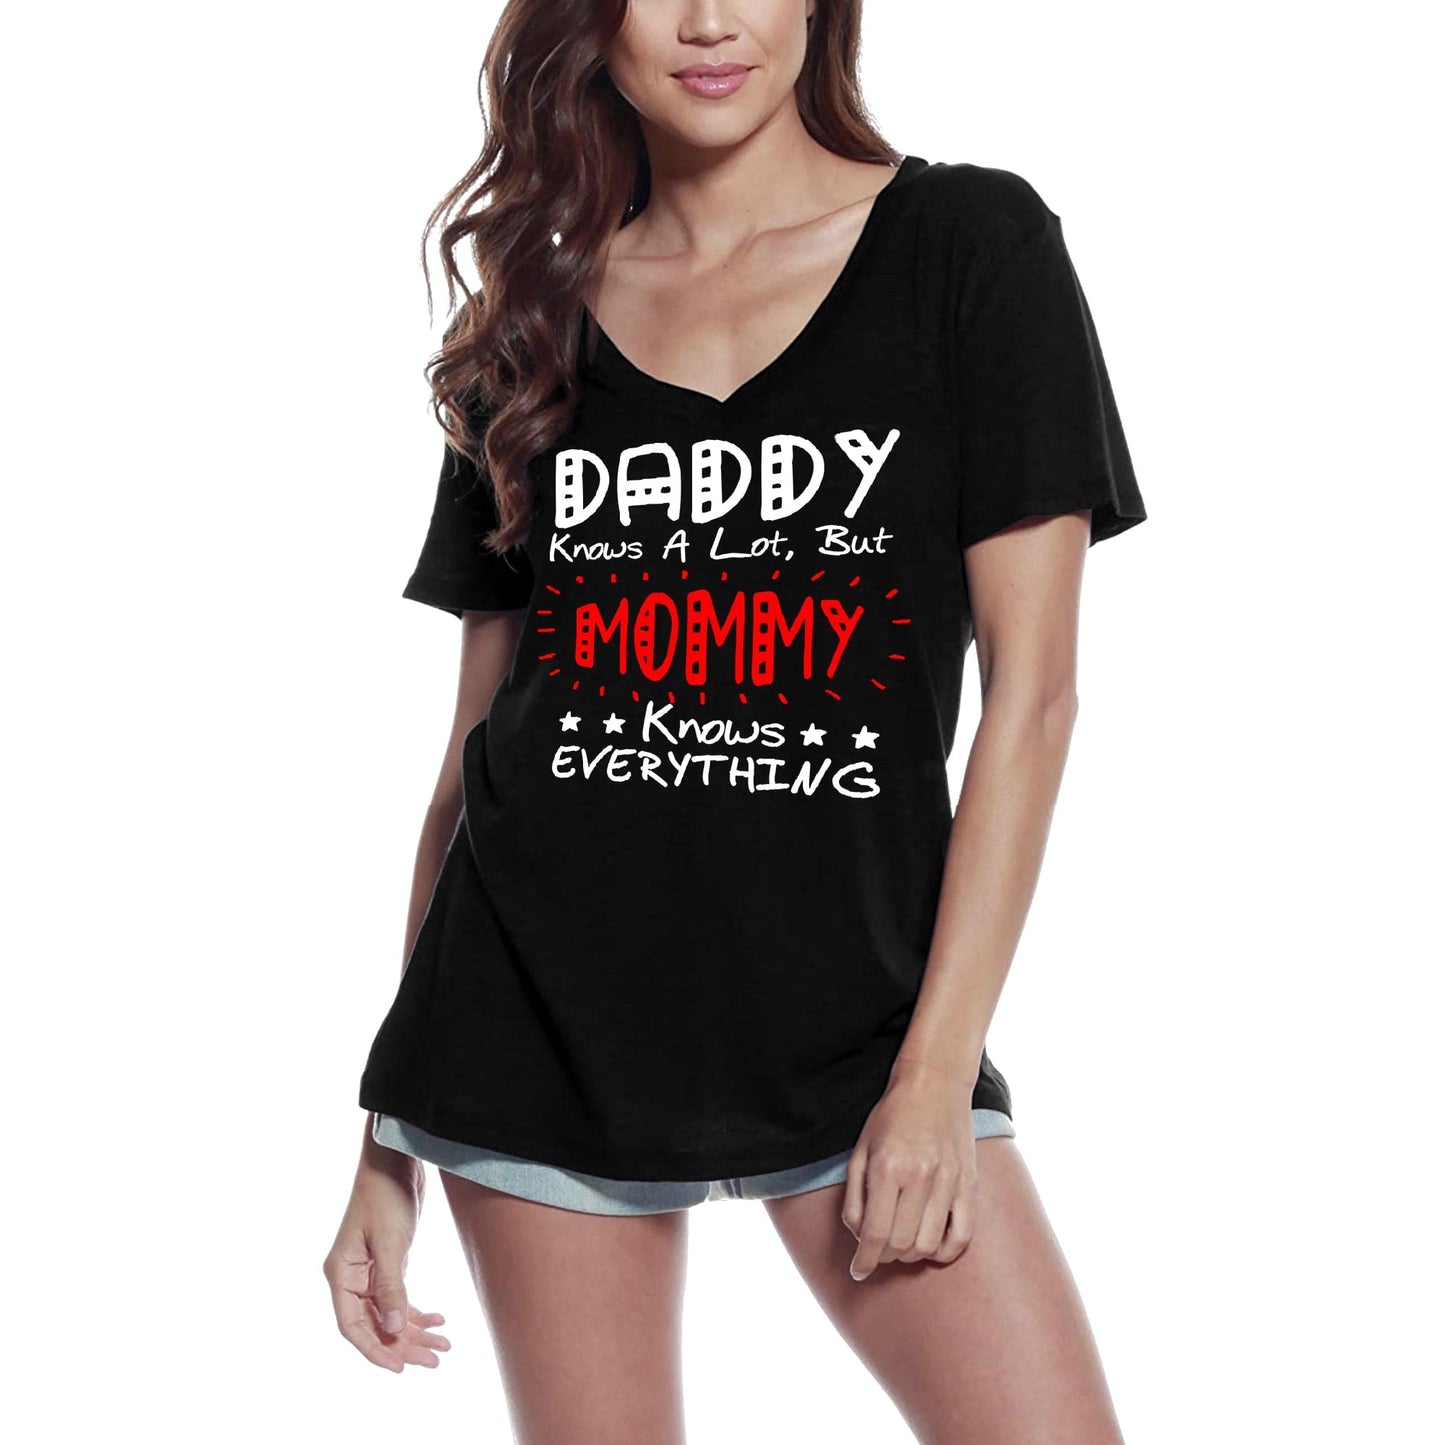 ULTRABASIC Women's T-Shirt Daddy Knows a Lot but Mommy Knows Everything Tee Shirt Tops